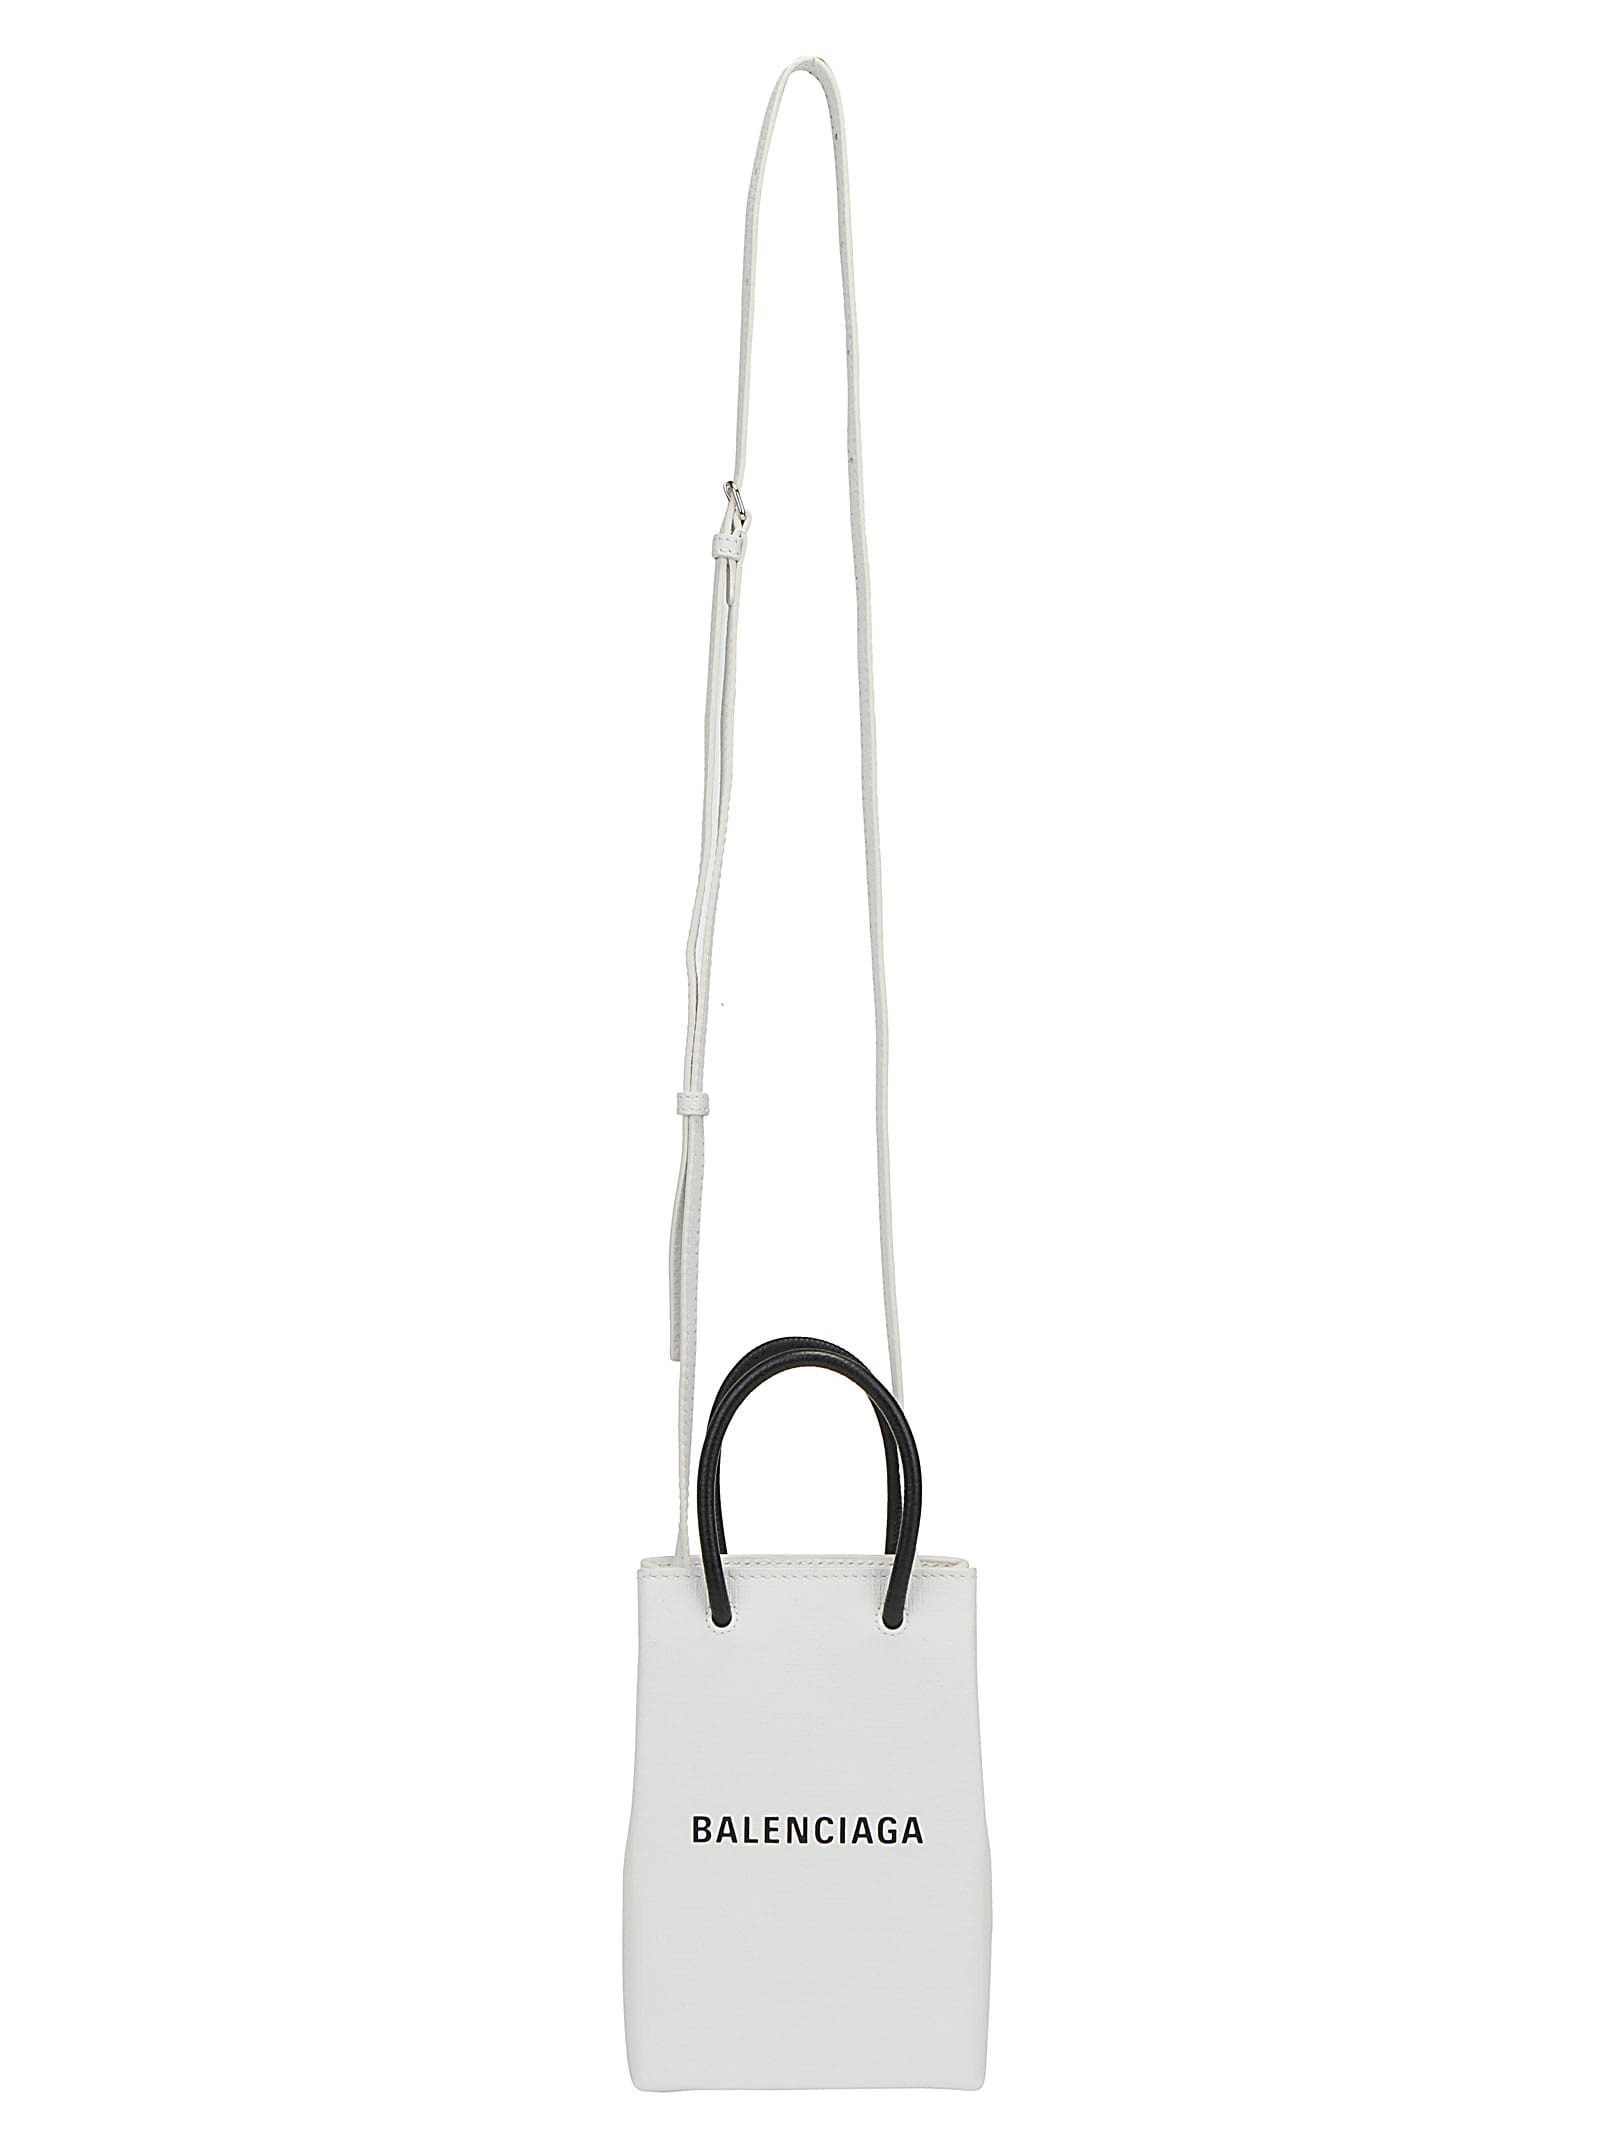 Balenciaga releases a 600 WATER BOTTLE holder  Daily Mail Online